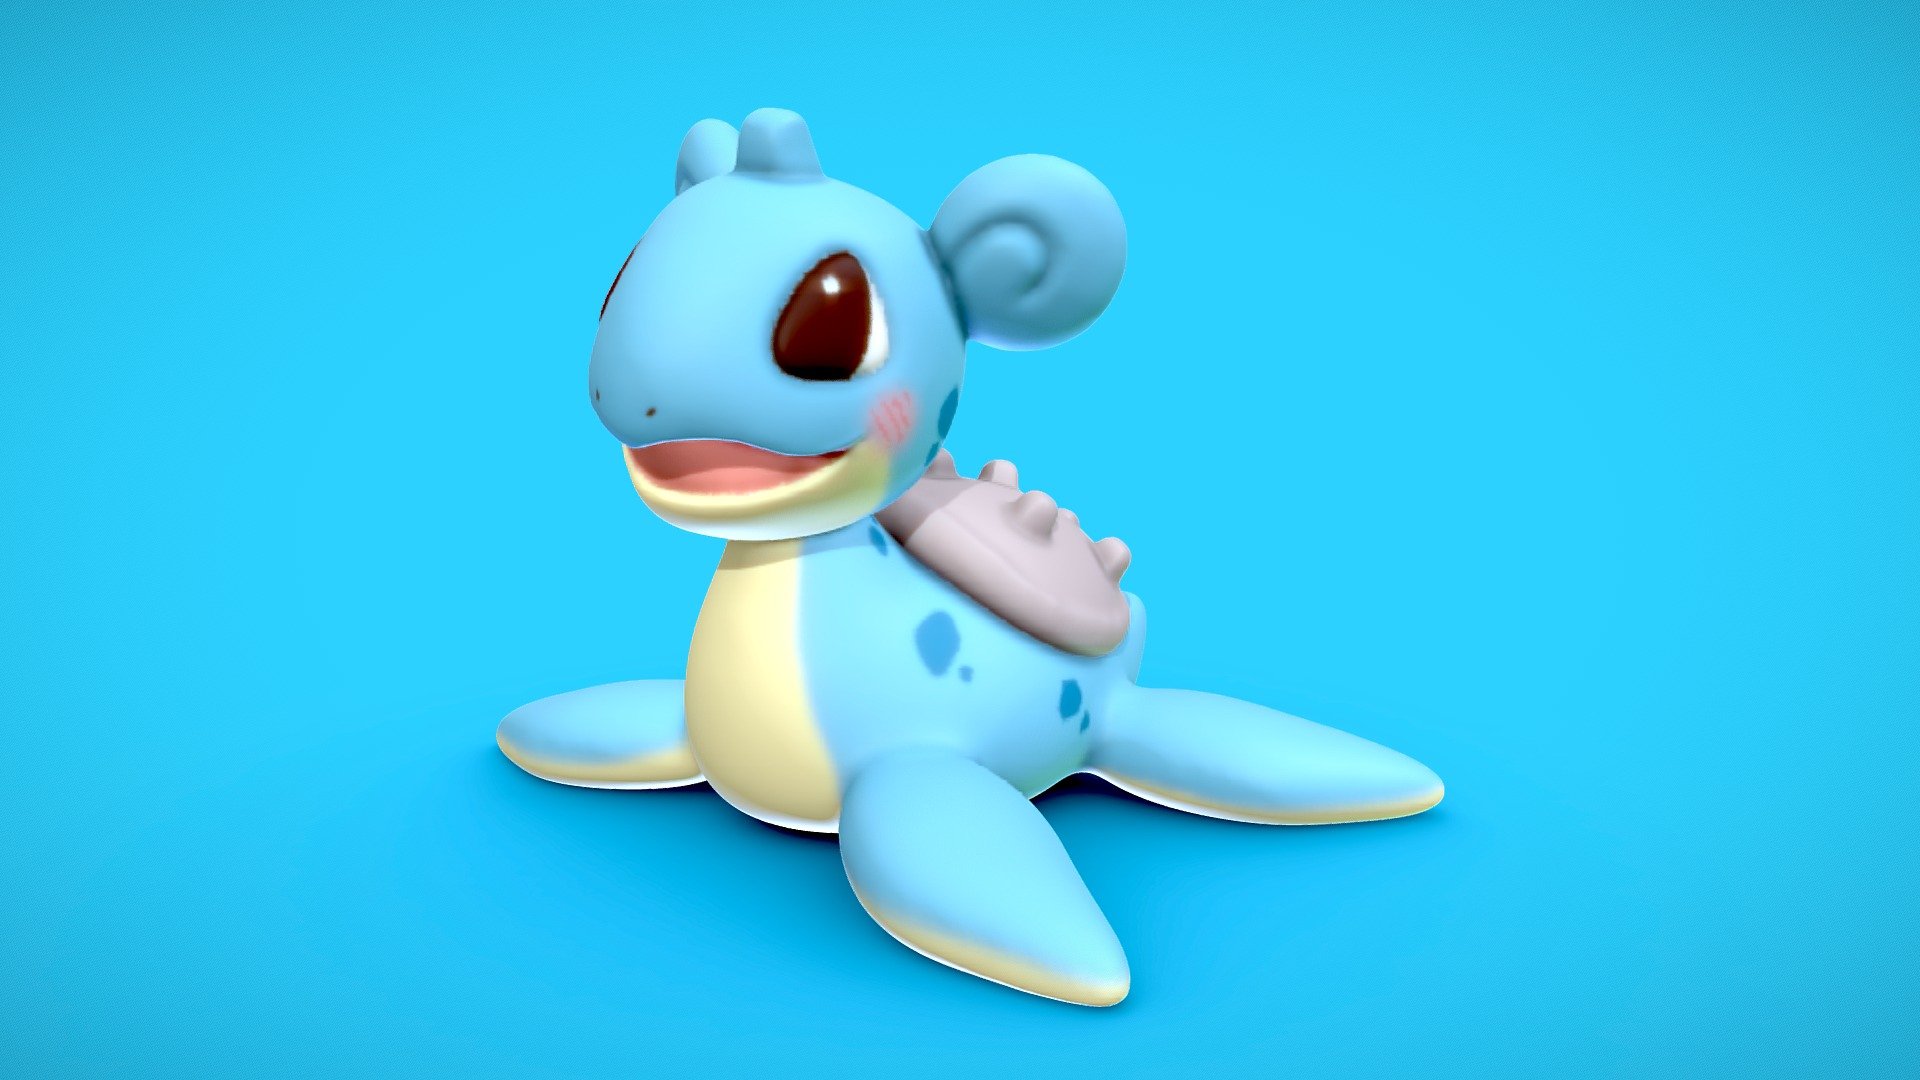 A smart and kindhearted Pokémon, it glides across the surface of the sea while its beautiful song echoes around it.

Ready for 3D printing!

Added cut part:




head 

right ear

left ear 

body

Images

Contains:




.Blend

.Fbx

.STL
 - Lapras - 3d print - Buy Royalty Free 3D model by LessaB3D 3d model